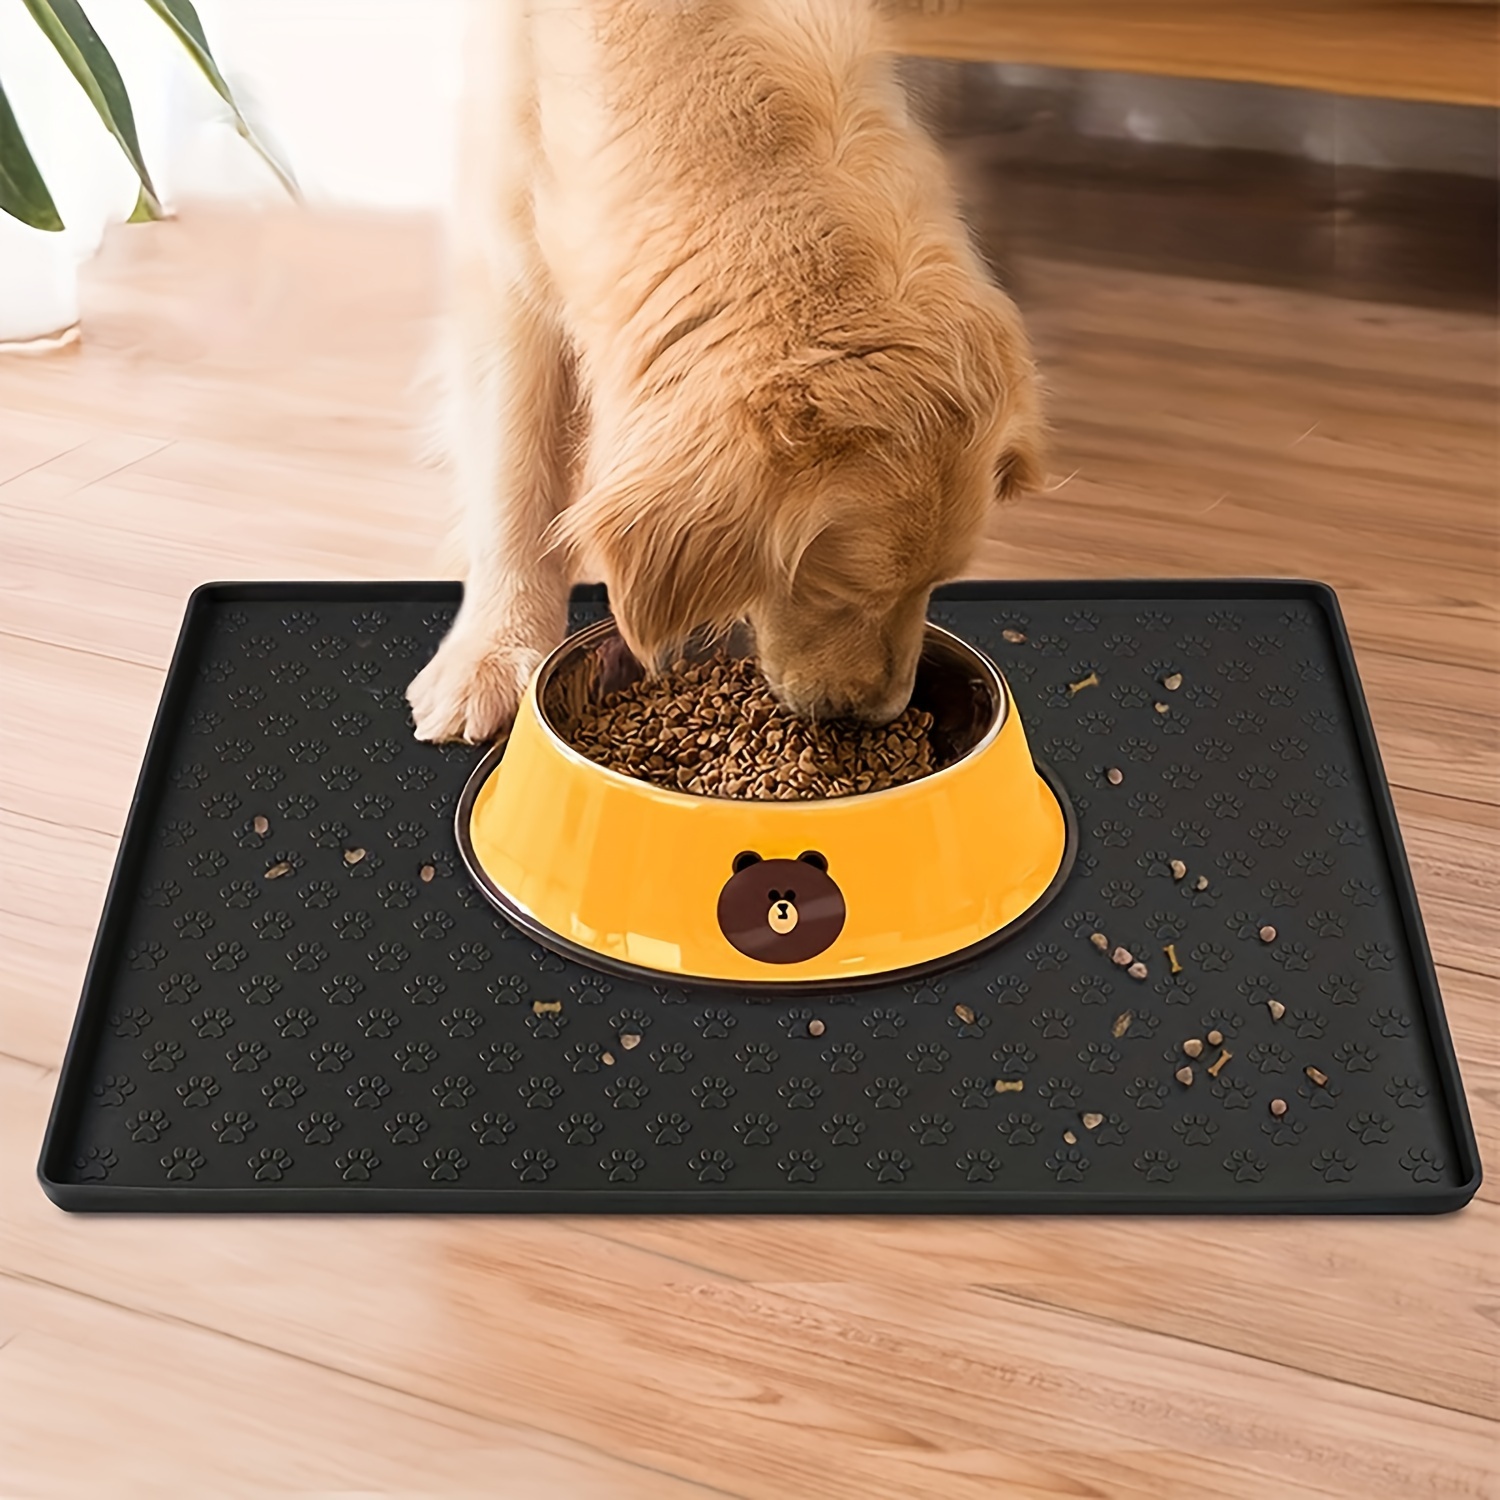 Conlun Silicone Dog Food Mat, Waterproof Rubber Pet Food Mat for Dog and  Cat, Anti-Slip Dog Bowl Mat with Raised Edge, Avoid Water Or Food Spilling